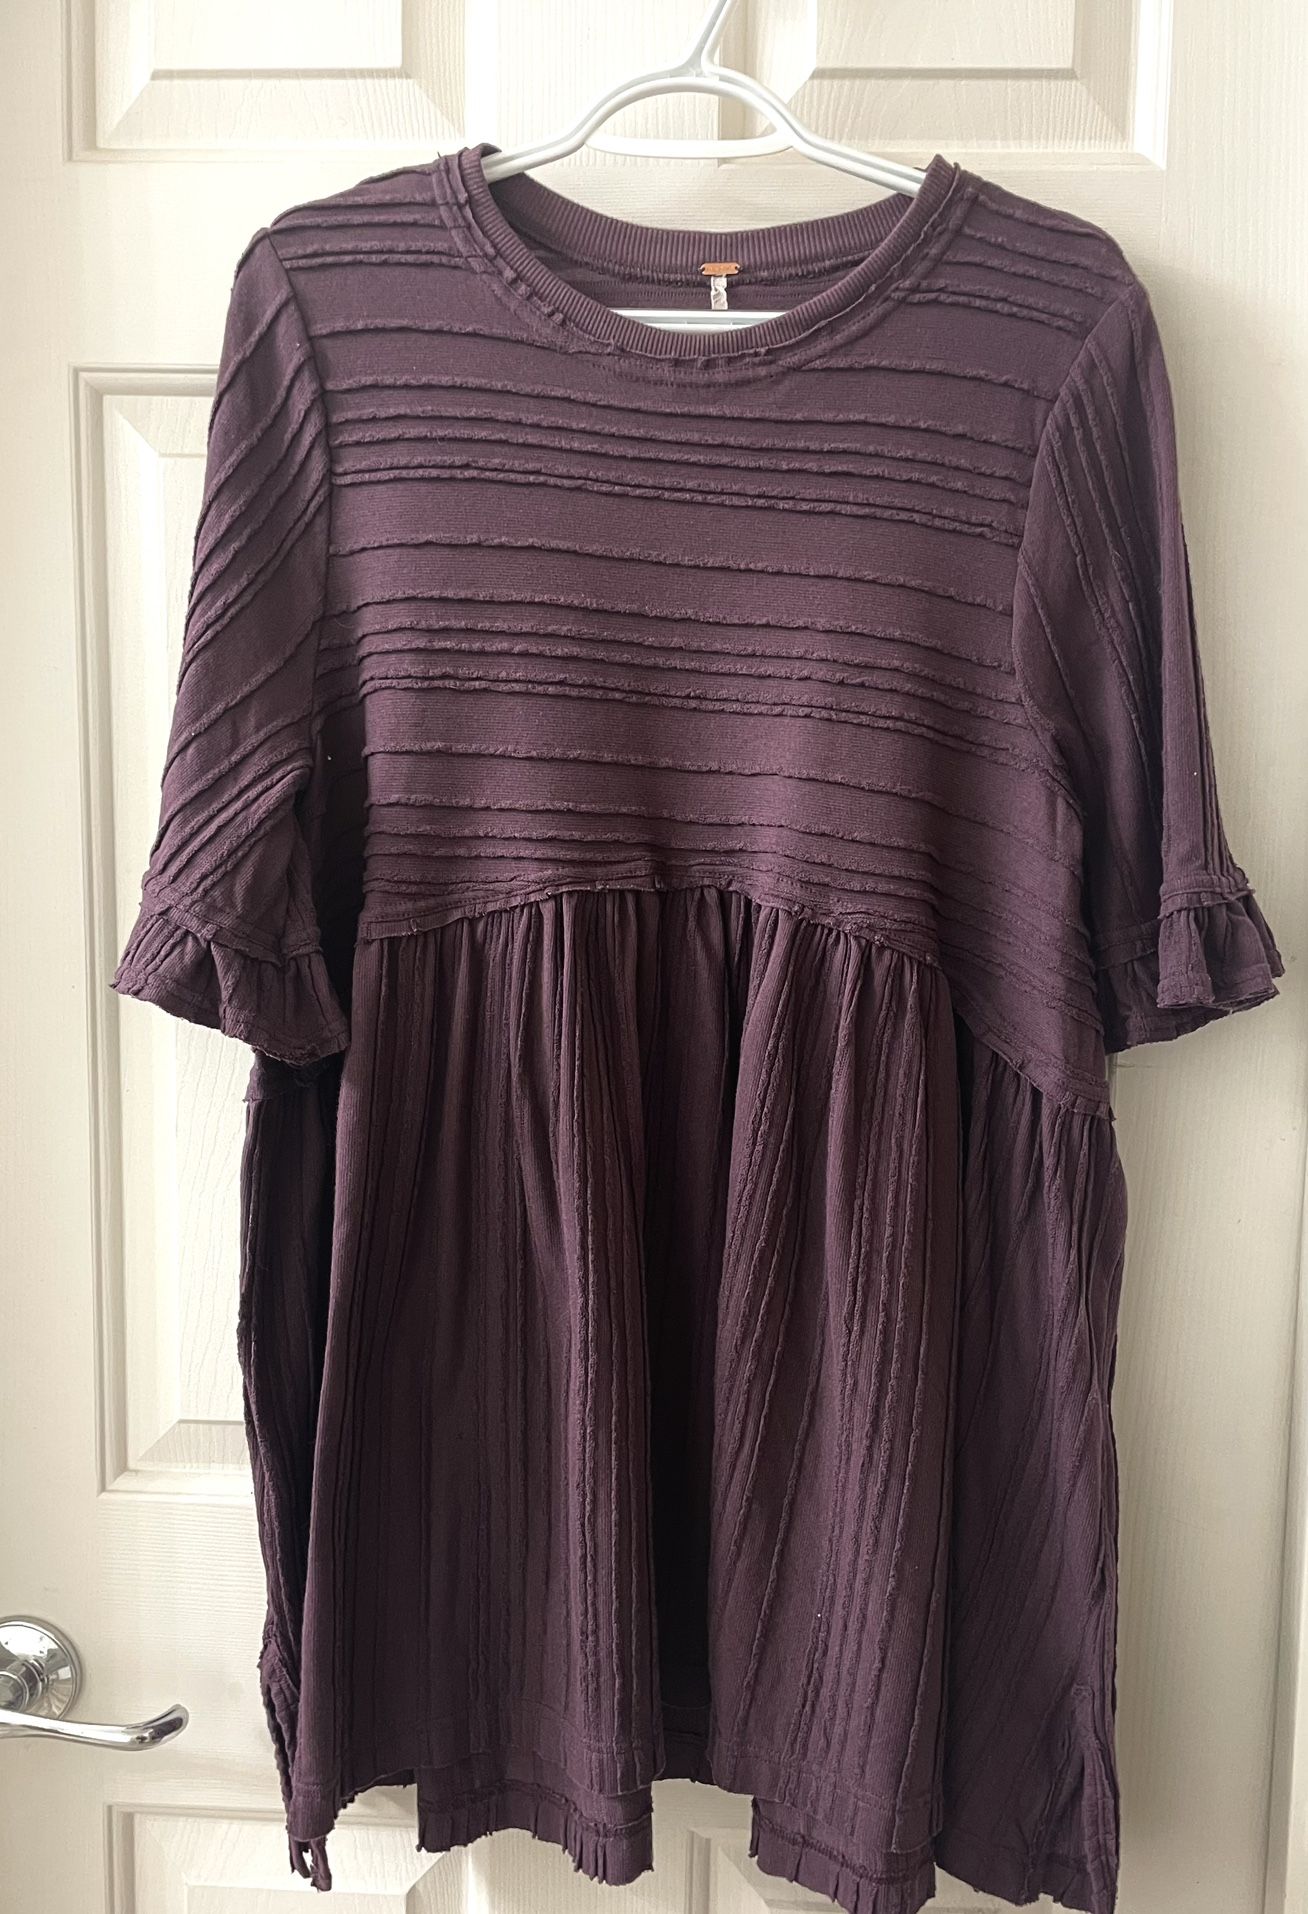 Free People Tunic New Without Tags-Small